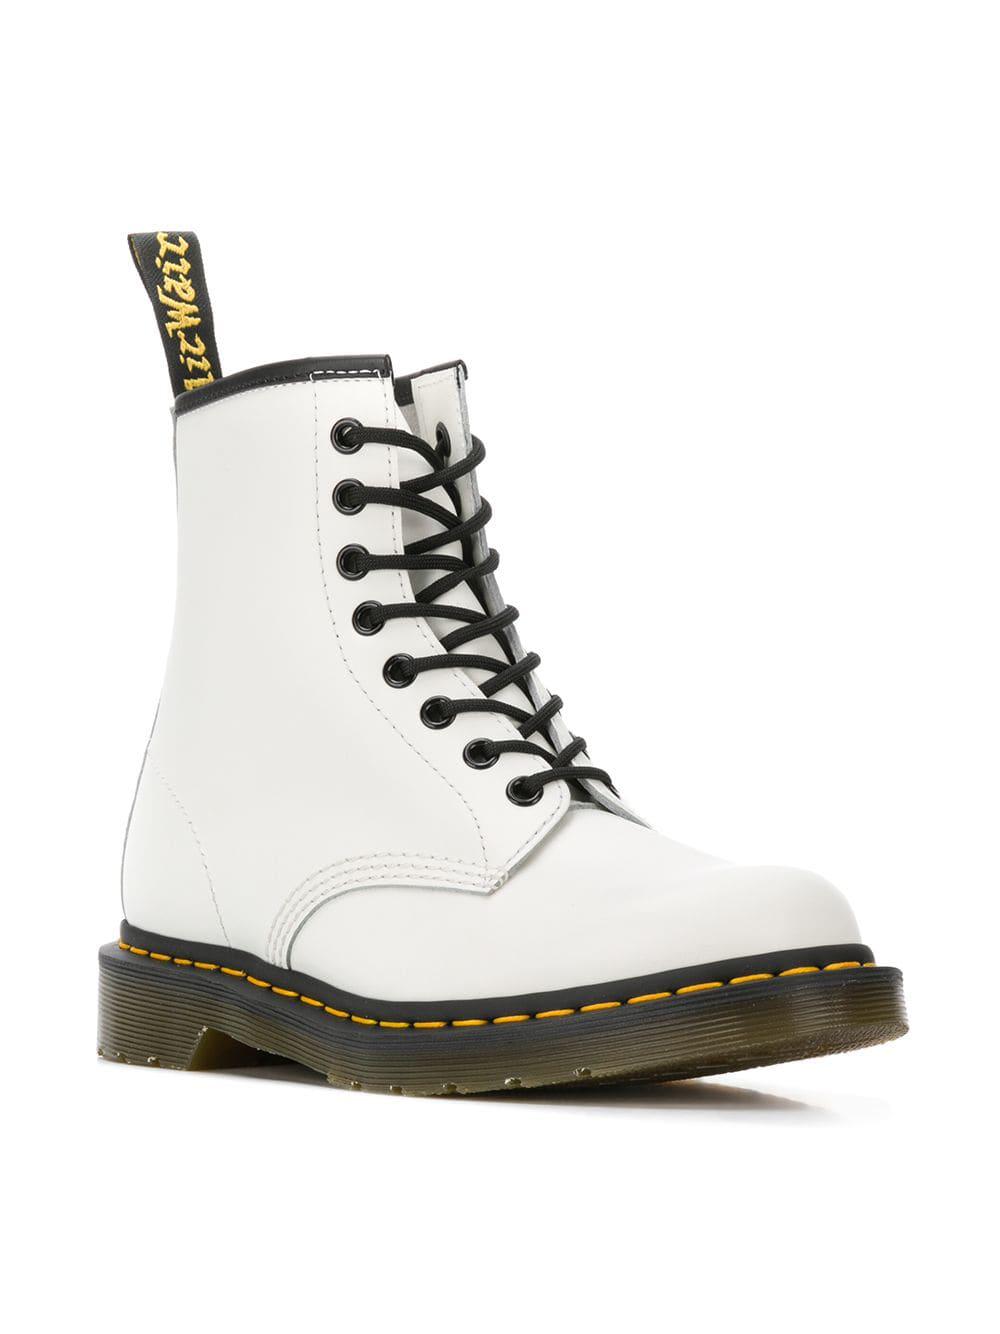 Lyst - Dr. Martens 1460 Lace-up Boots in White